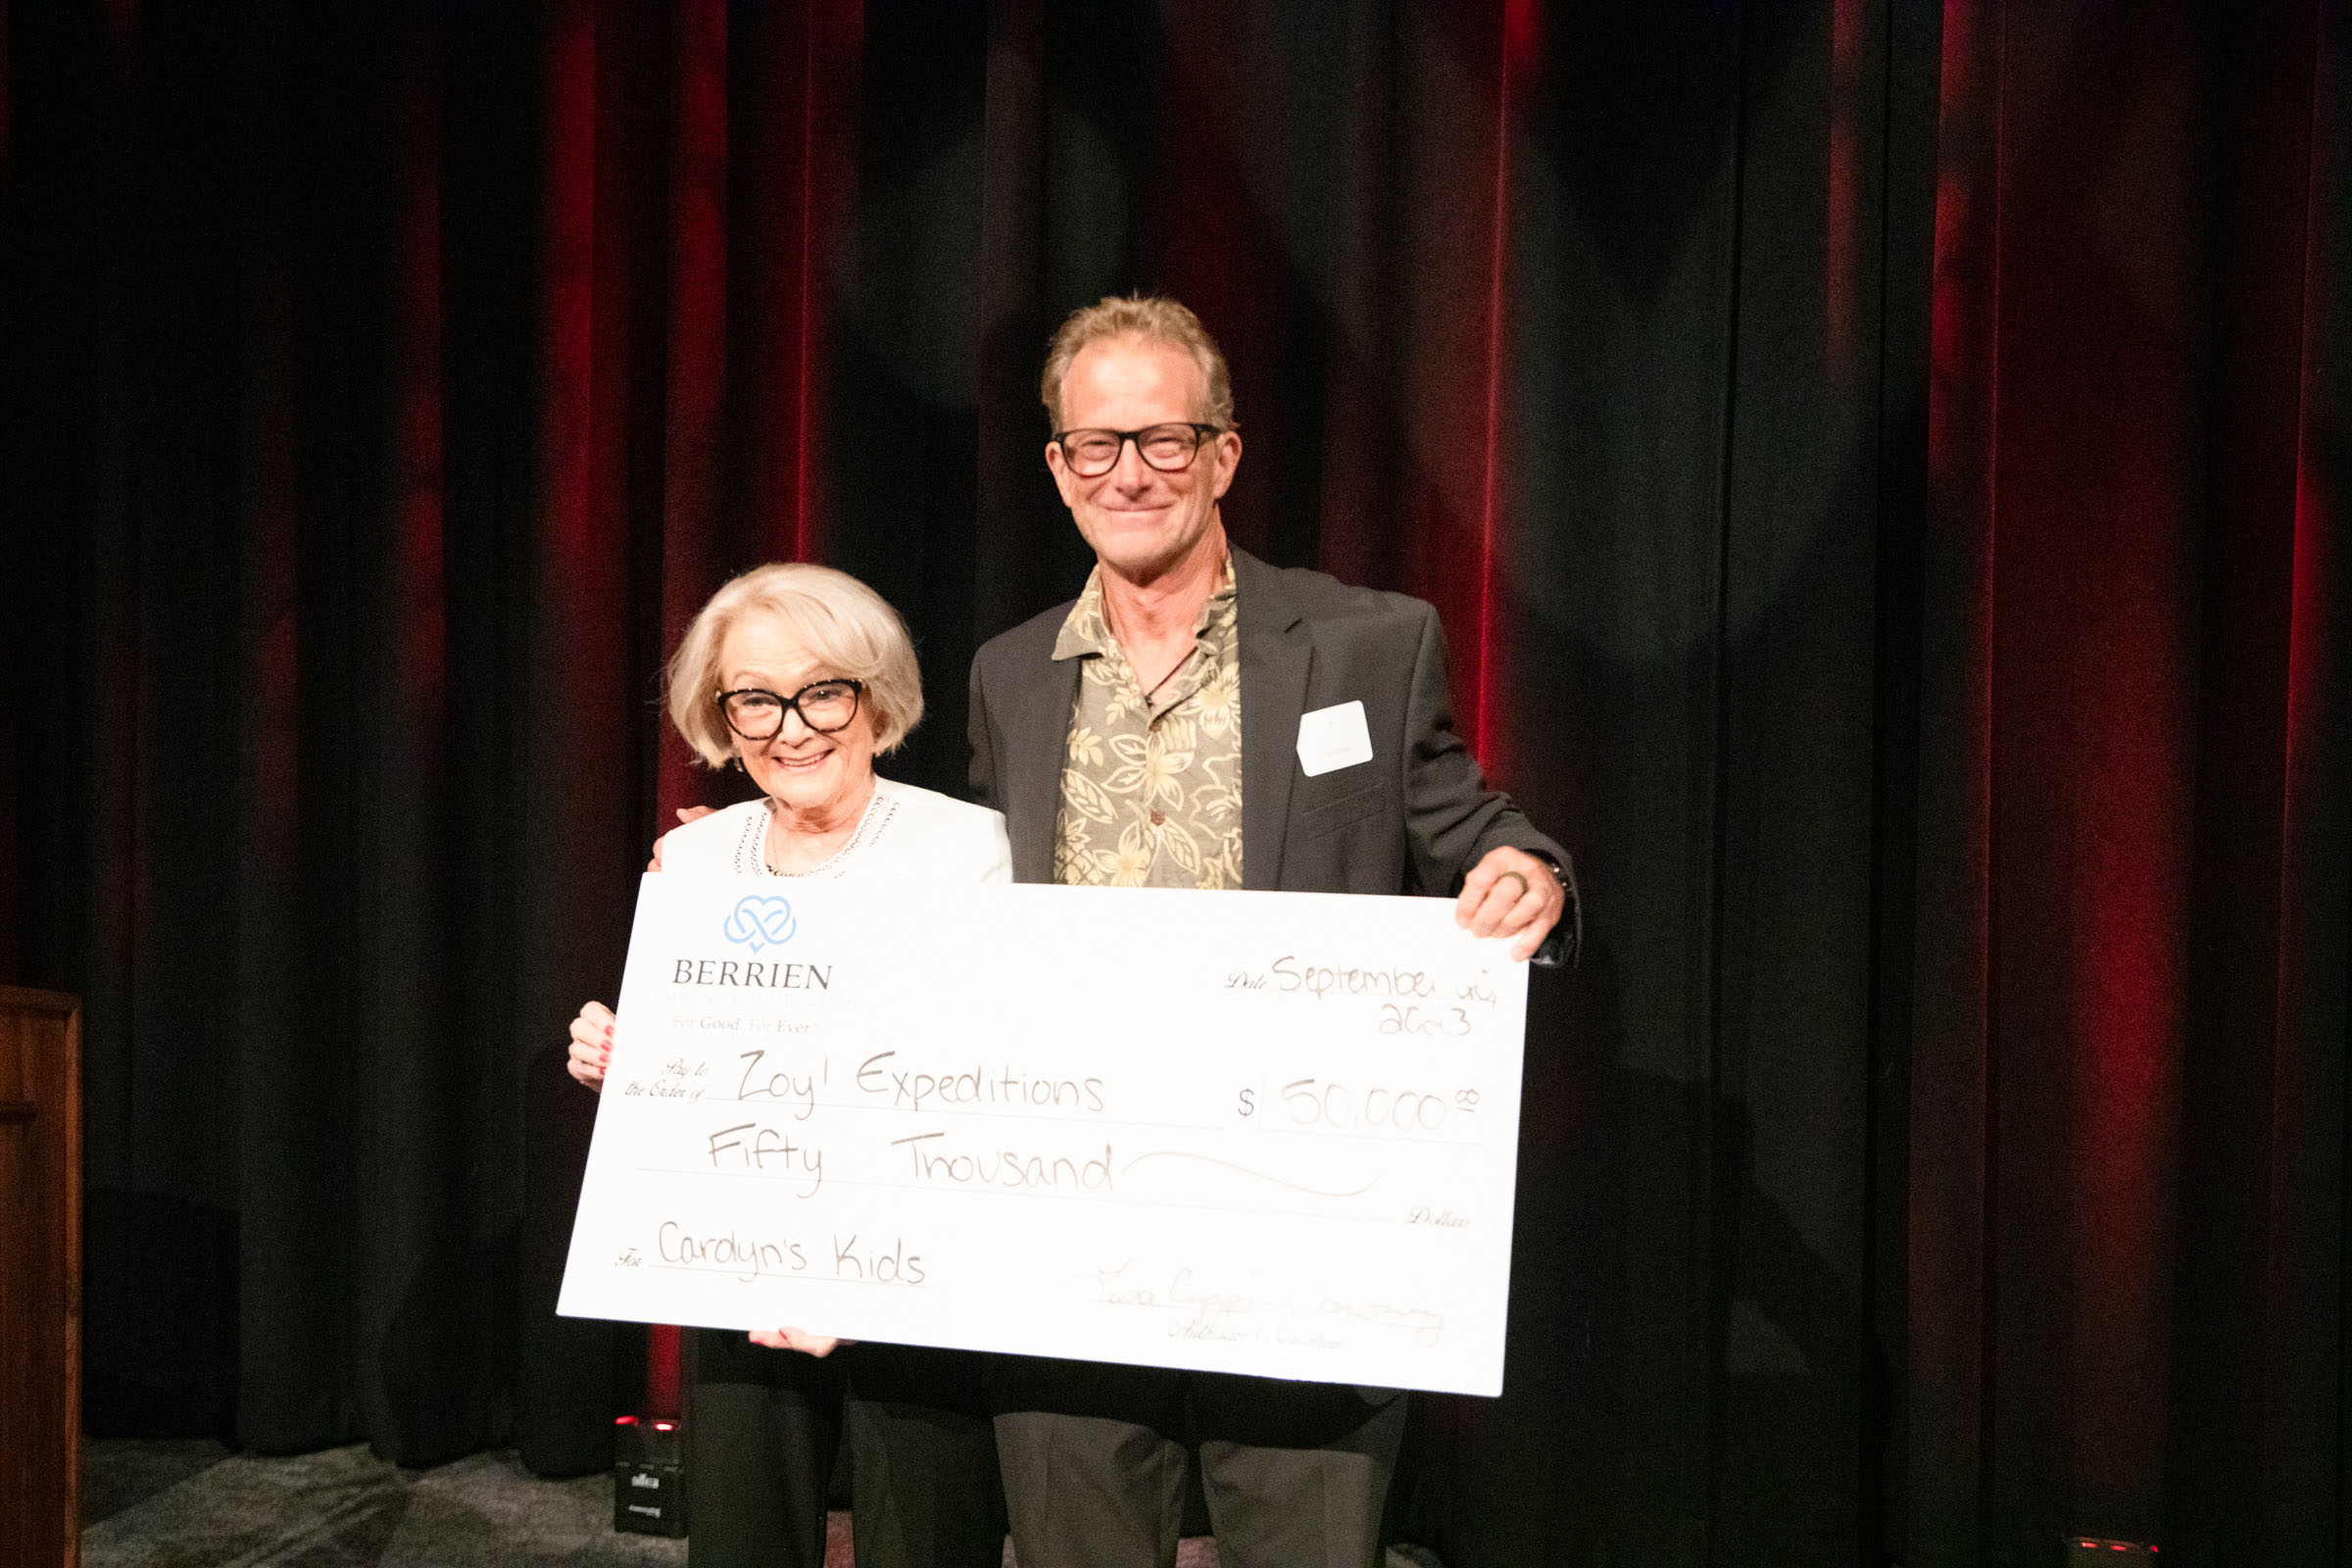 Carolyn Hanson (left) creator of Carolyn’s Kids grant, presents a $50,000 check to ZoY! Expeditions founder Al Mussman (right) September 20 at Berrien Community Foundation's Annual Meeting & Celebration. ZoY! Expeditions was selected as a $50,000 Carolyn’s Kids winner.